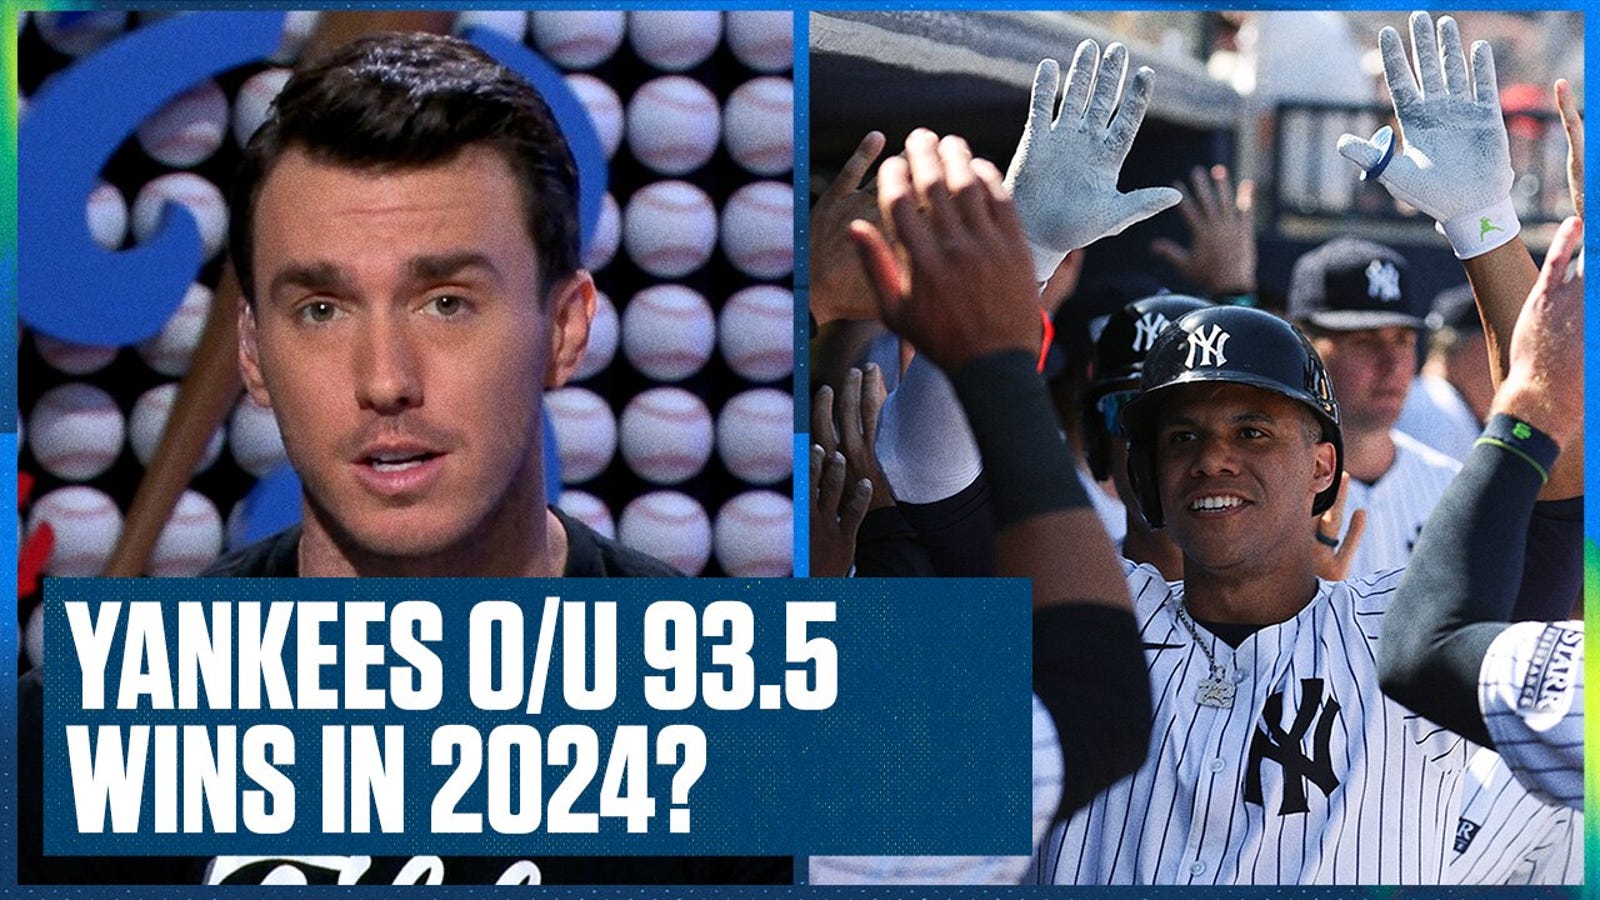 Will the New York Yankees go over 93.5 wins in 2024?